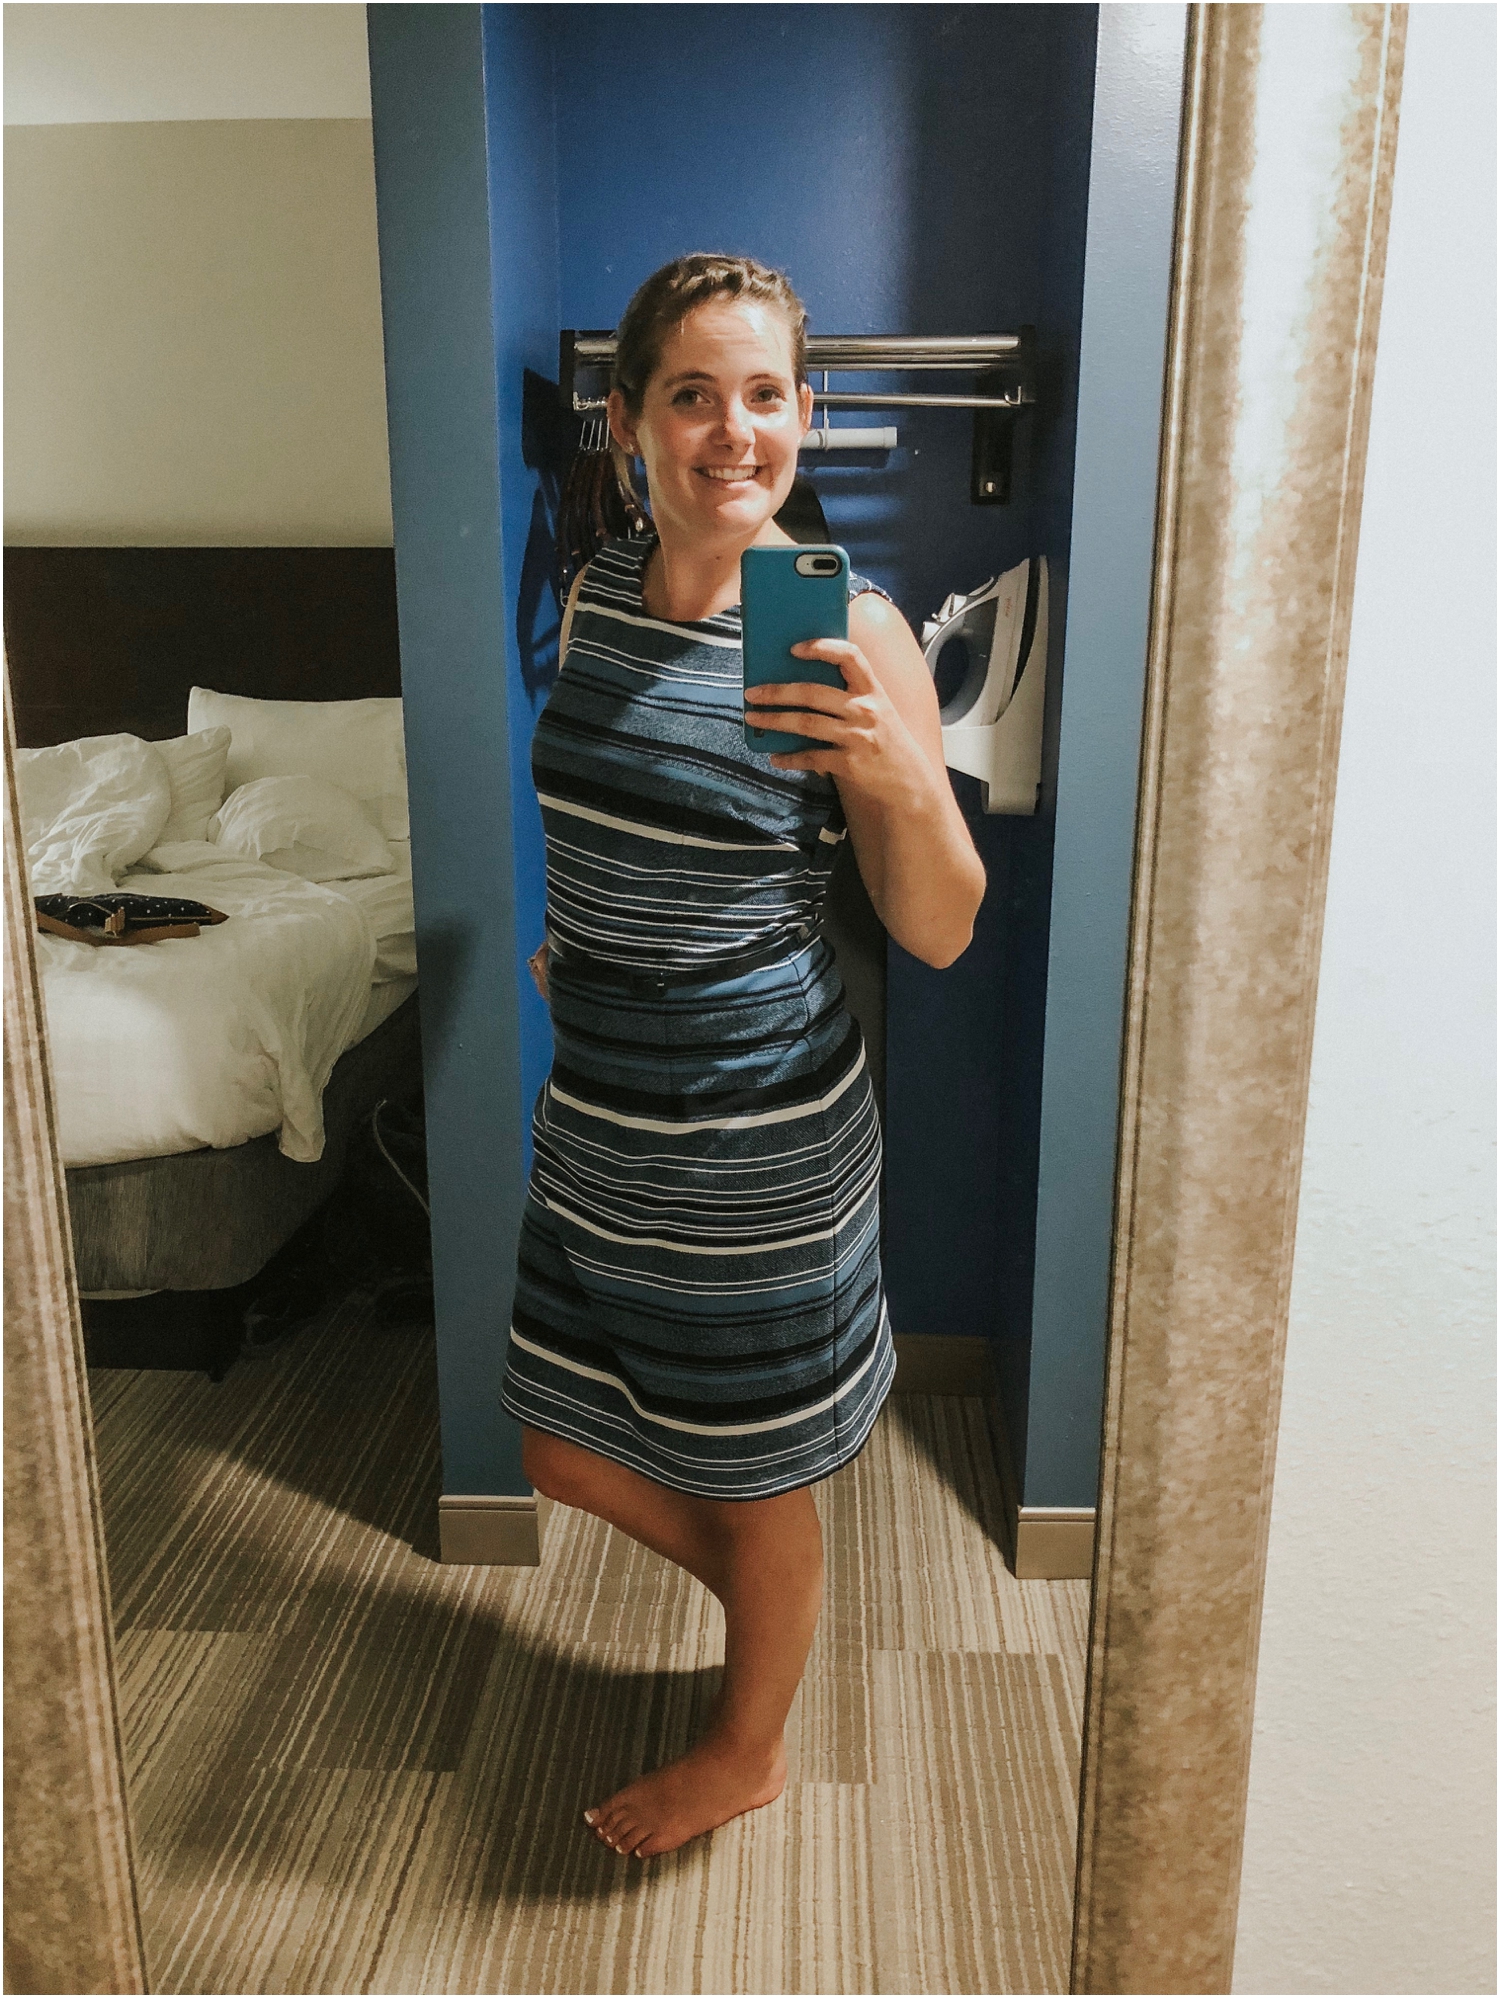 Last year, I only had two dresses that I wore all year. This year, I had a rotation of 4-5 new ones! Obviously, I was excited to wear this blue one that matched the hotel room.